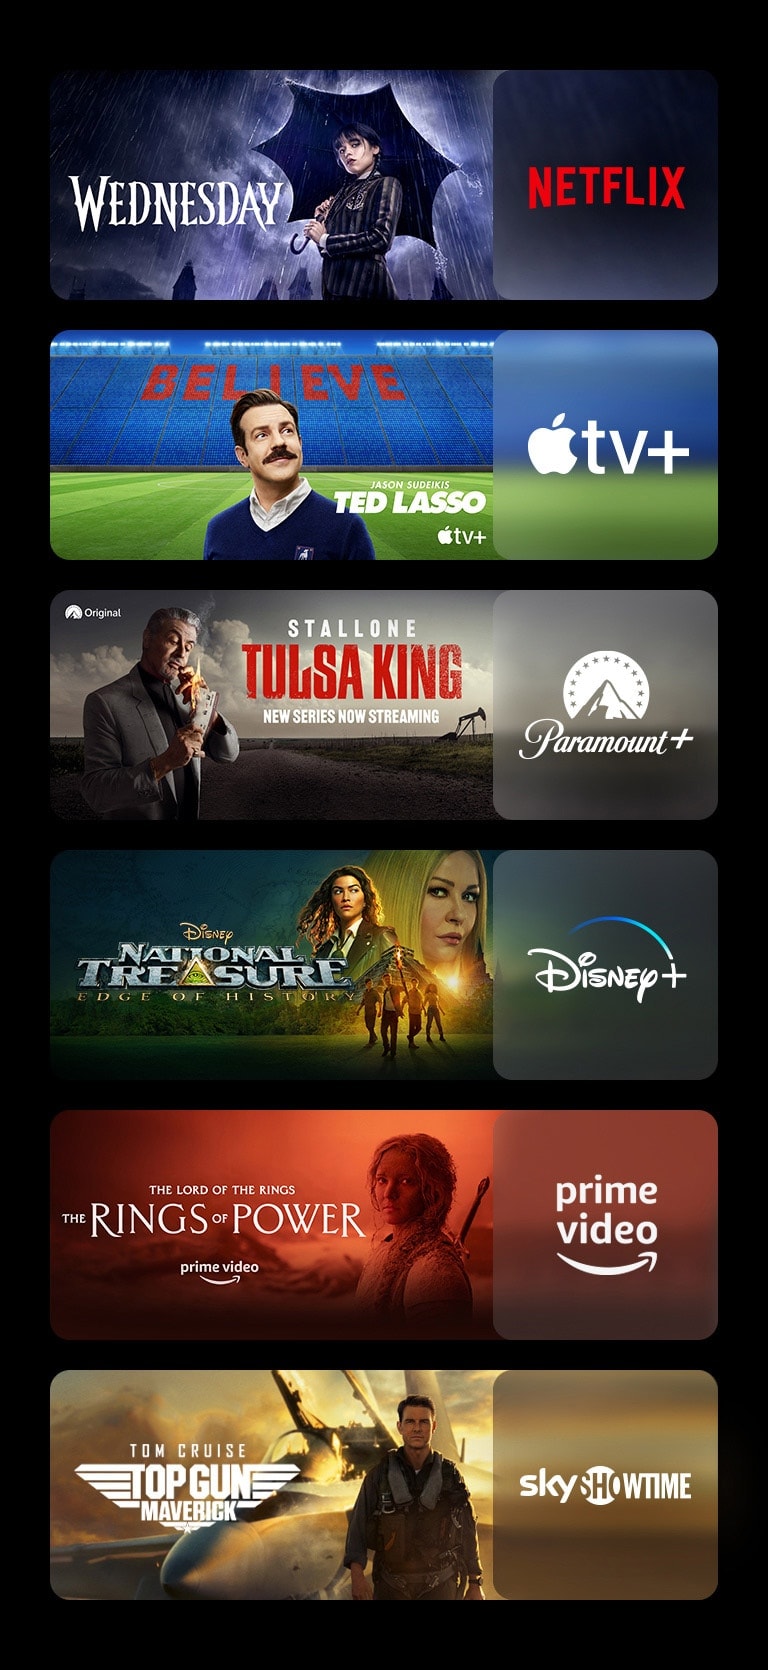 There are six image blocks – each with streaming platform logo and footage image. Netflix logo with the Wednesday, Apple TV plus logo with Ted lasso, Pramount plus logo with Tulsa king, Disney plus logo with National treasure, Prime video logo with The rings of power, Sky showtime logo with Top gun.